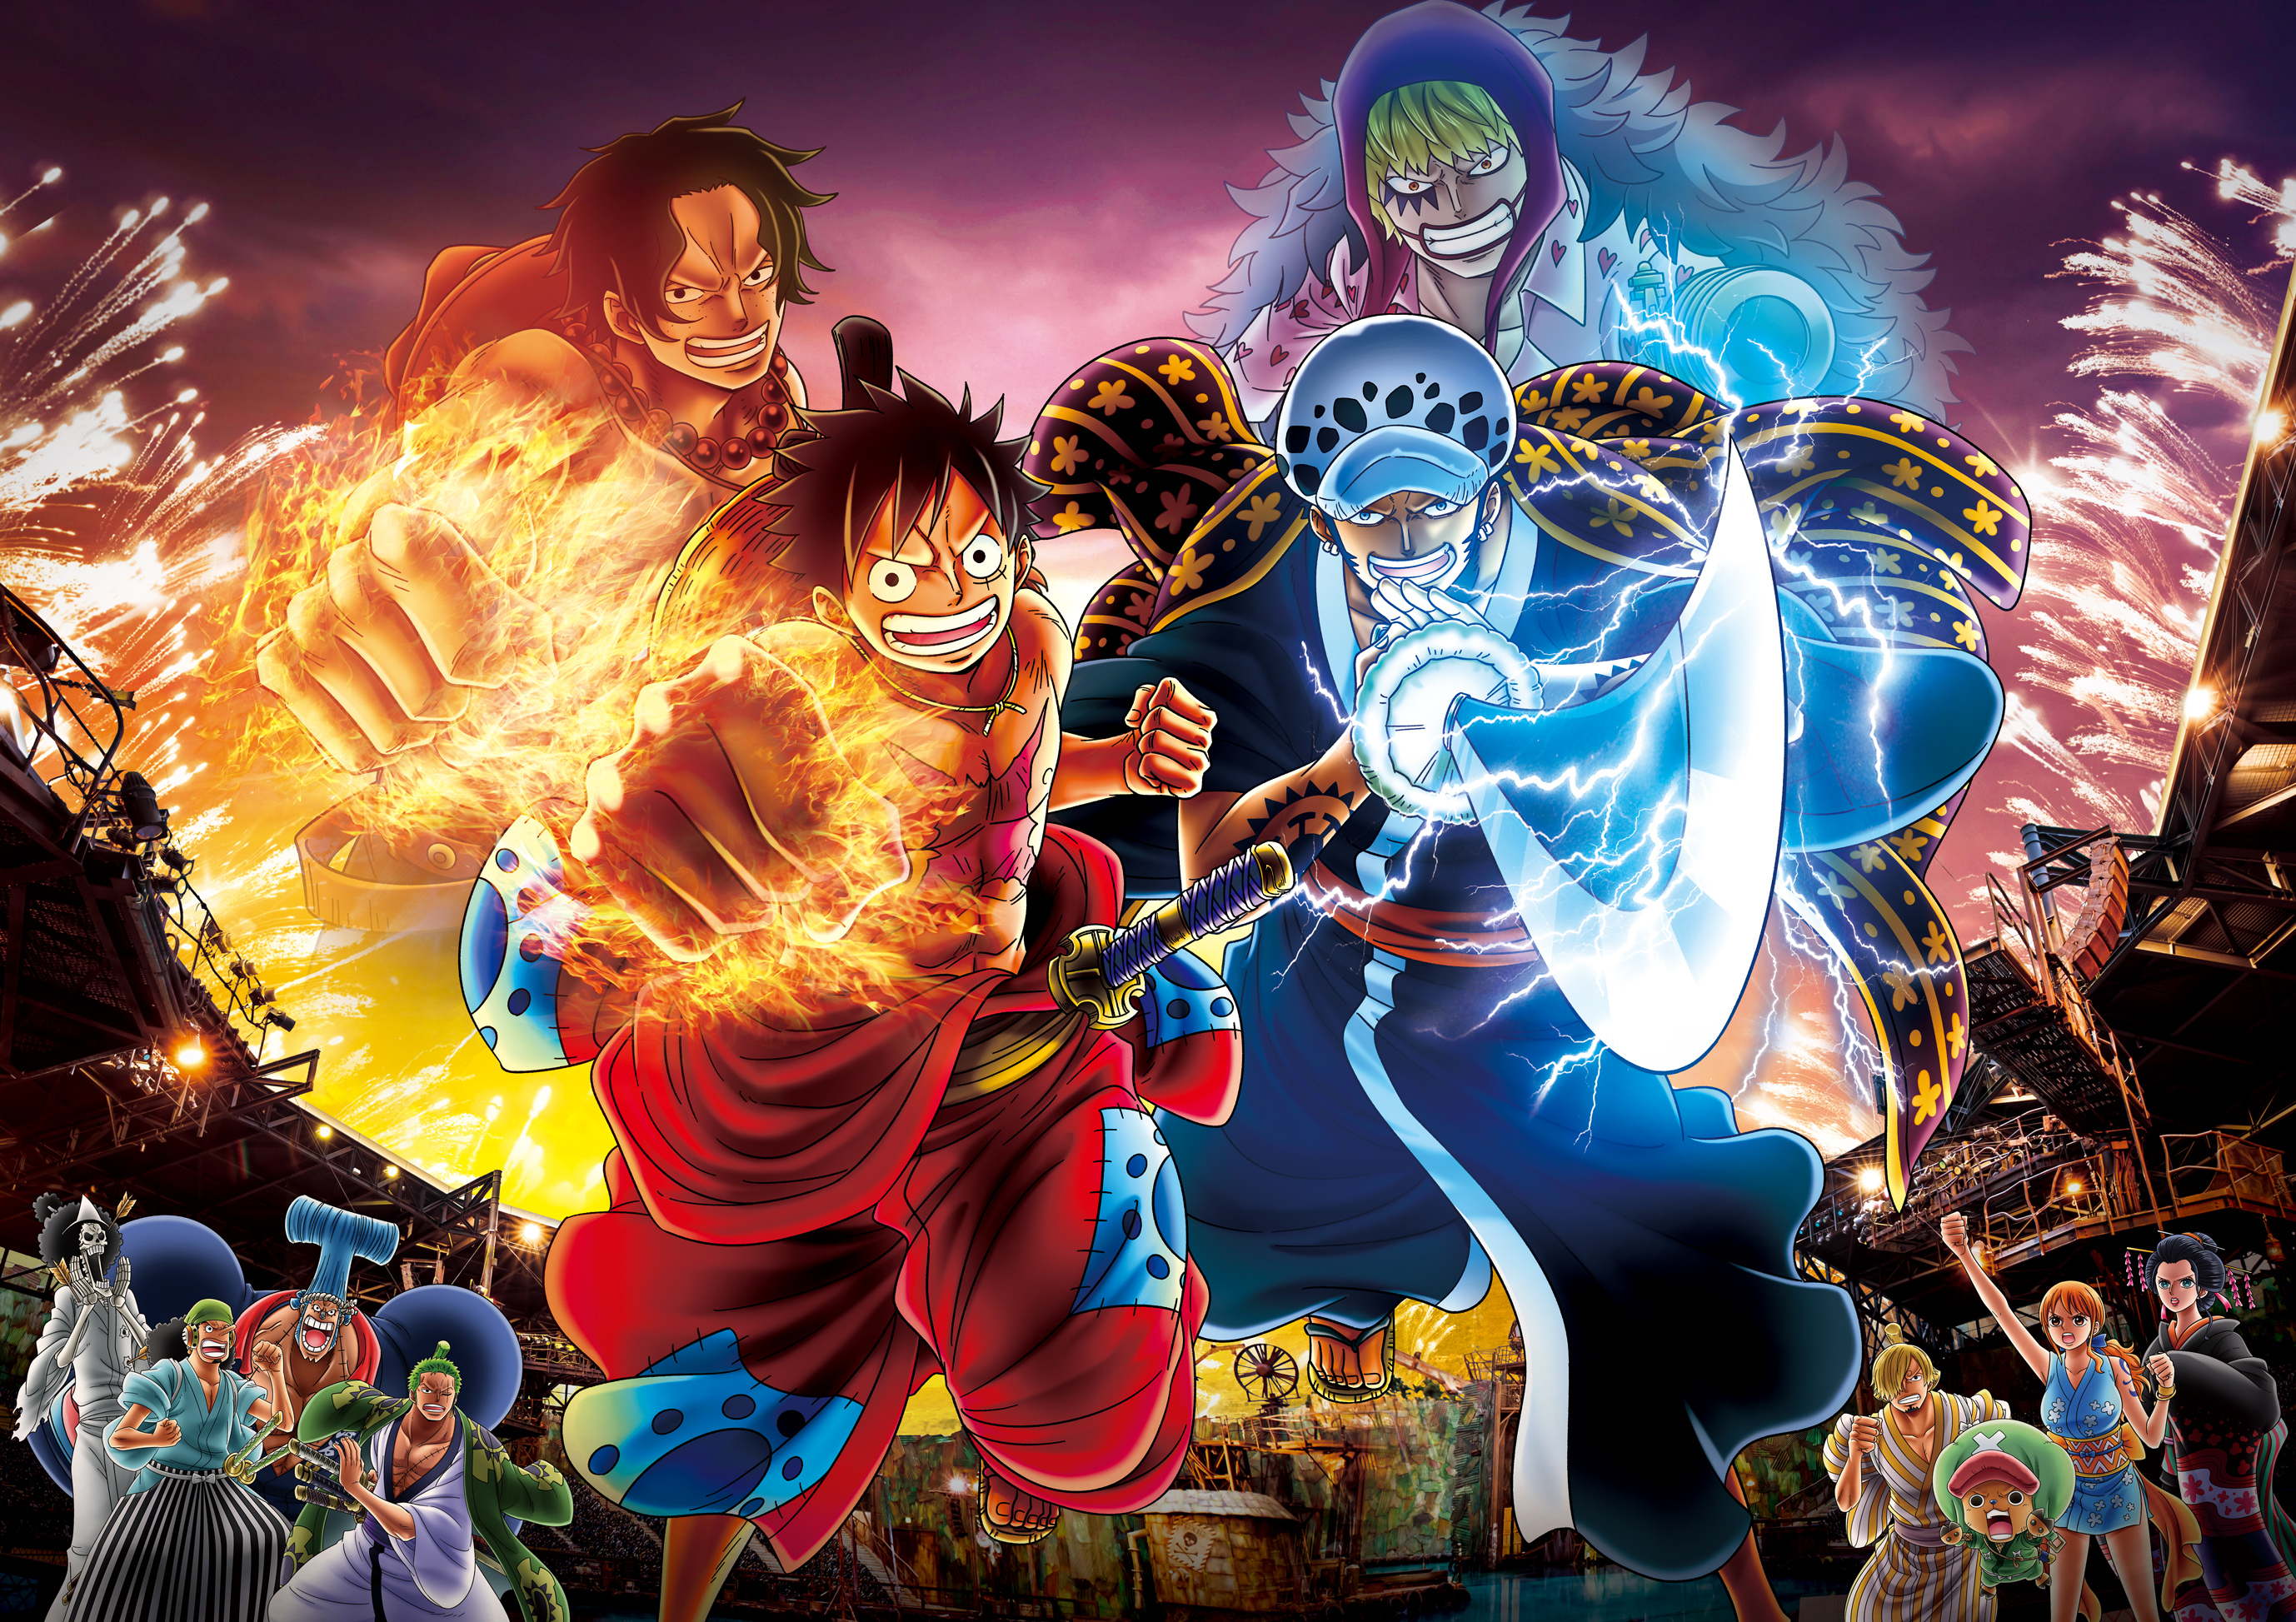 2932x One Piece Epic 2932x Resolution Wallpaper Hd Anime 4k Wallpapers Images Photos And Background Wallpapers Den